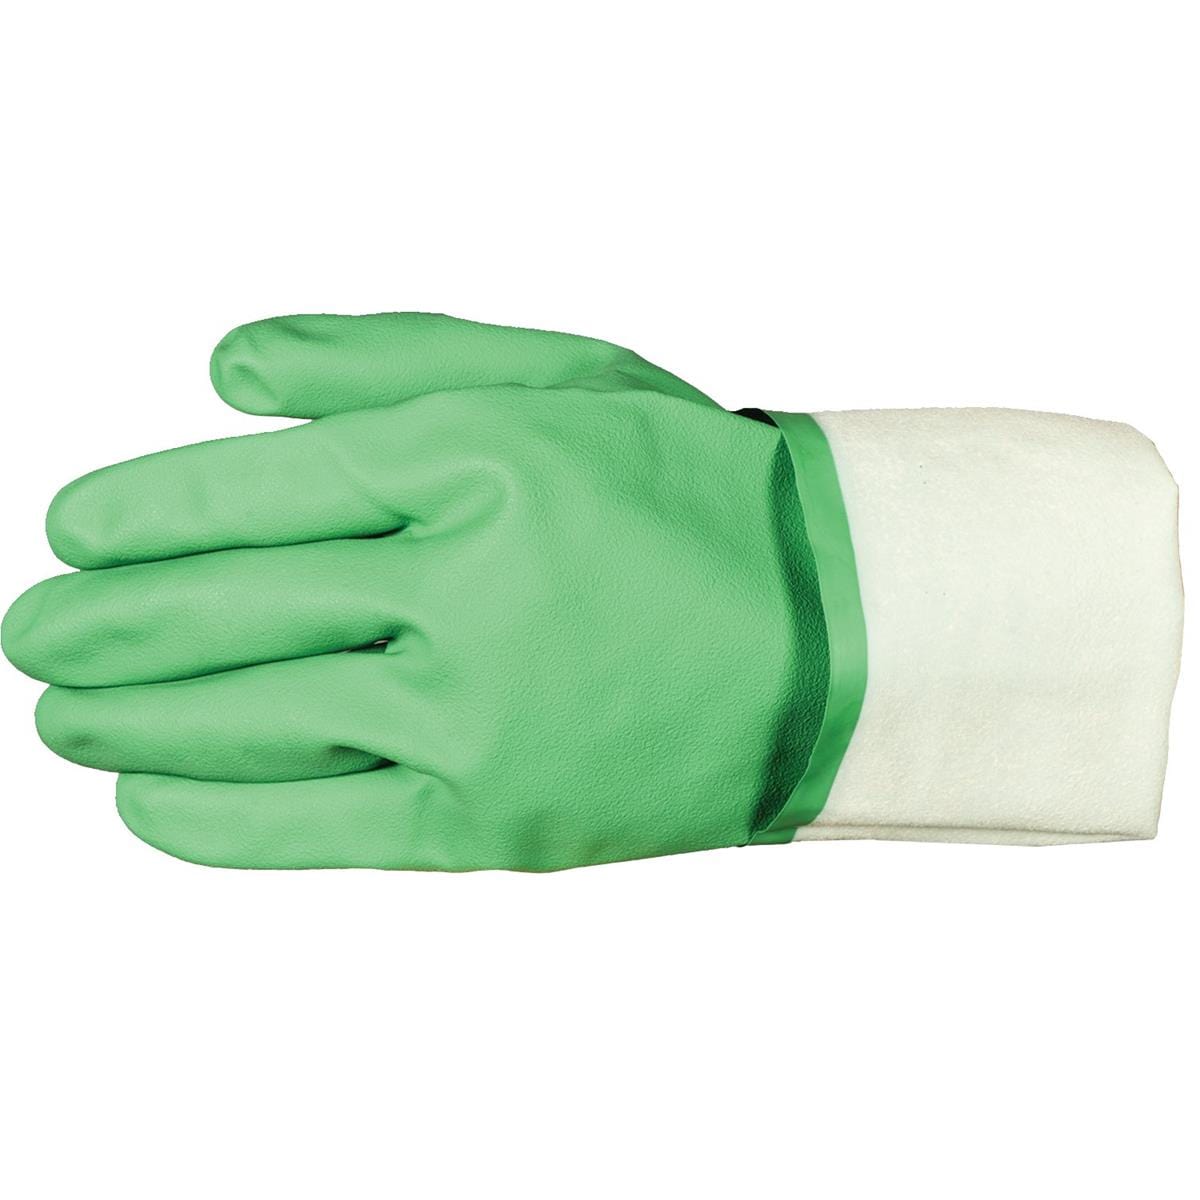 SHOWA 731 Chemical-Resistant 15-mil Flock-Lined Biodegradable Nitrile Gloves